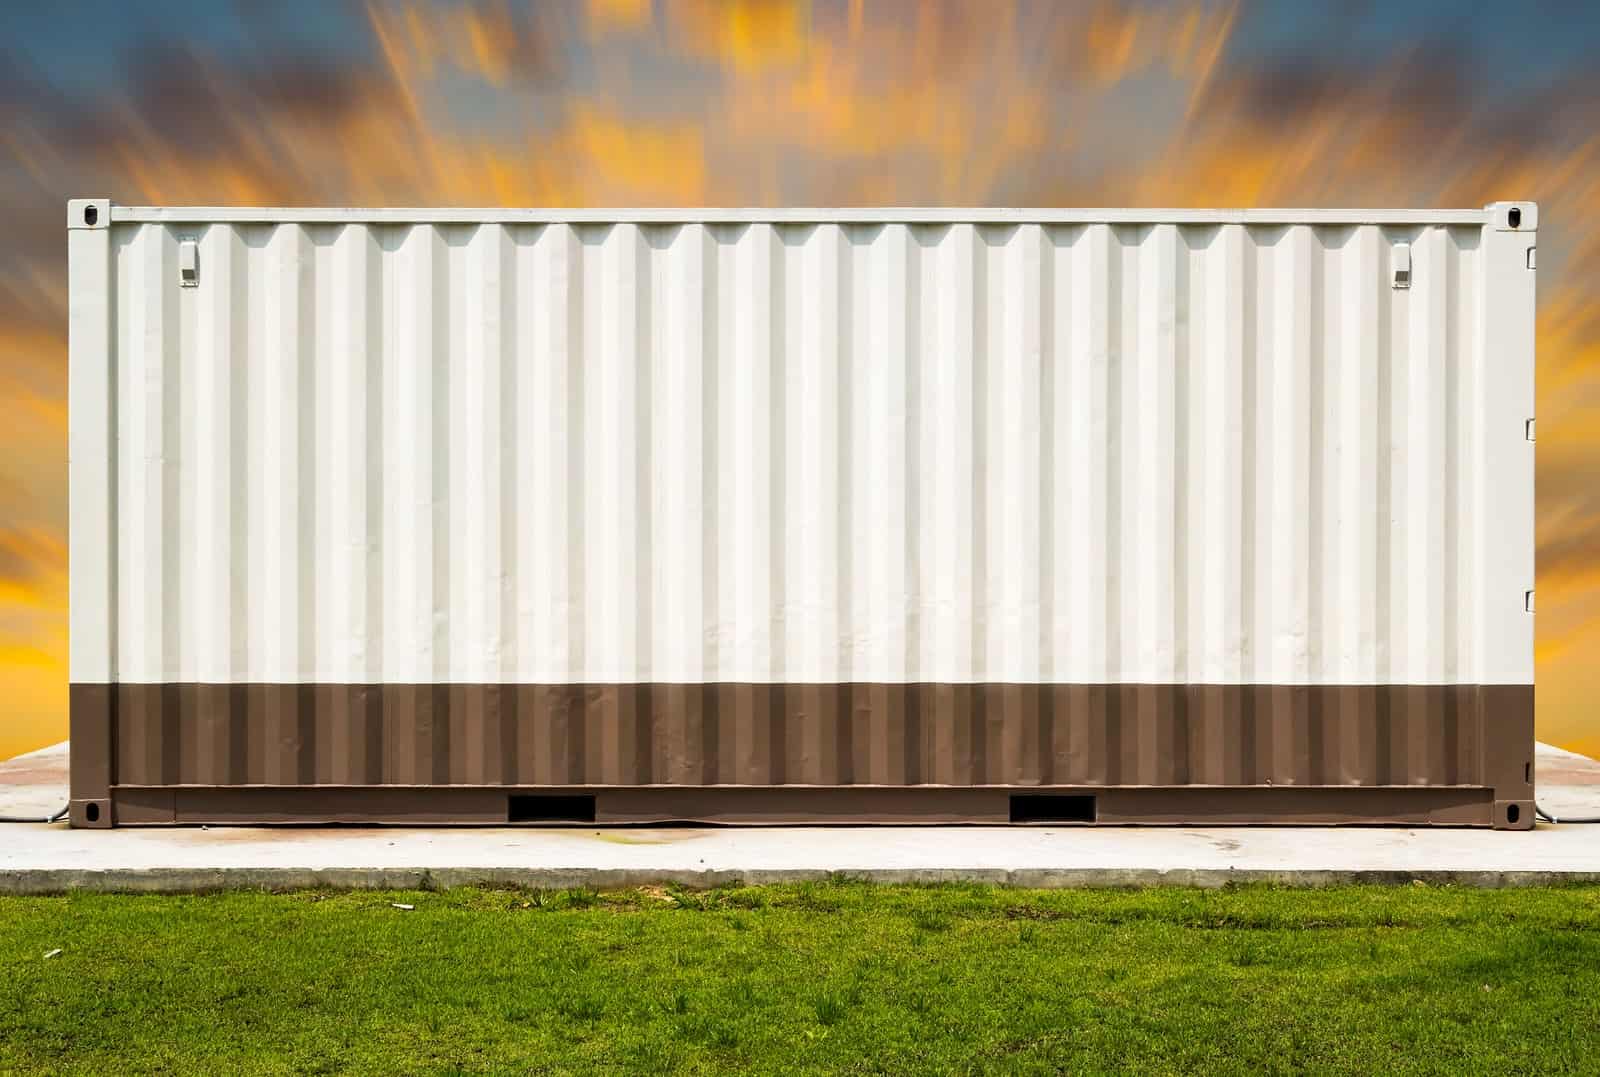 Used Storage Containers For Sale Are Neither Expensive nor Damaged